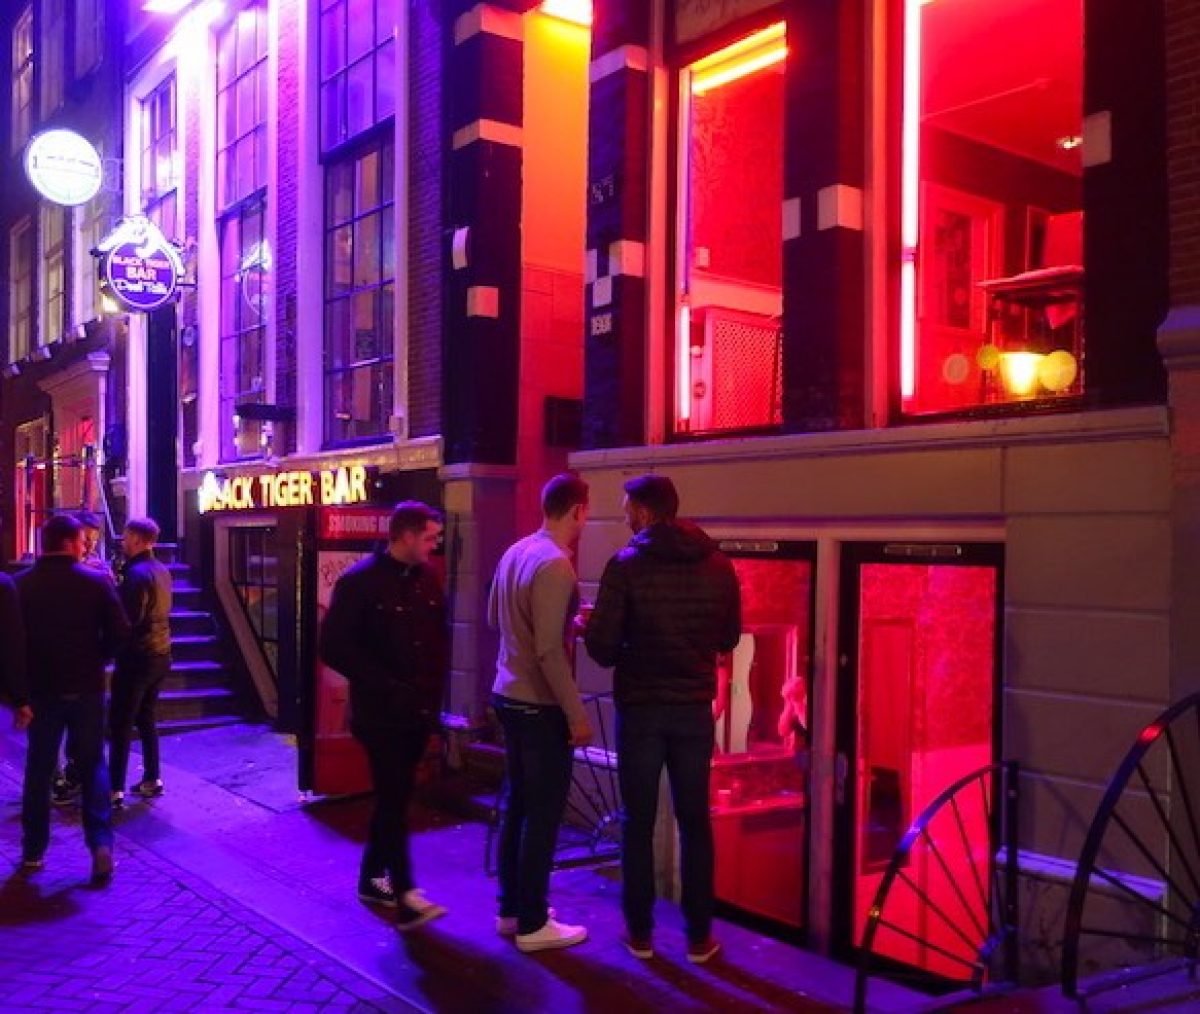 10x Amsterdam Red Light District Prices - What does everything cost? Amsterdam Red Light District Tours